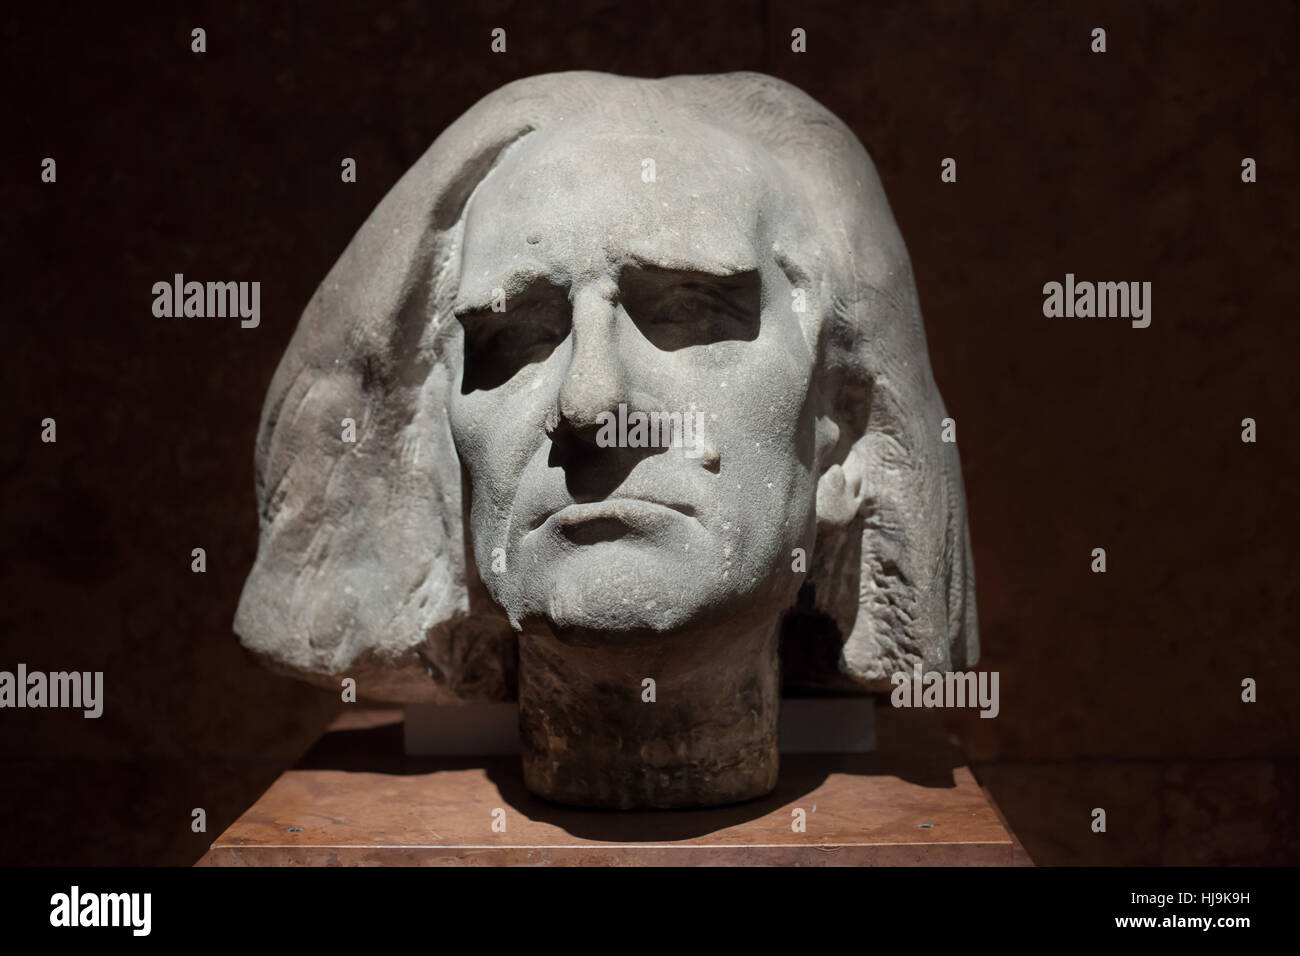 Head of Hungarian composer Franz Liszt (1884) by Hungarian sculptor Alojs Strobl on display in the Hungarian National Gallery (Magyar Nemzeti Galeria) in Budapest, Hungary. Stock Photo